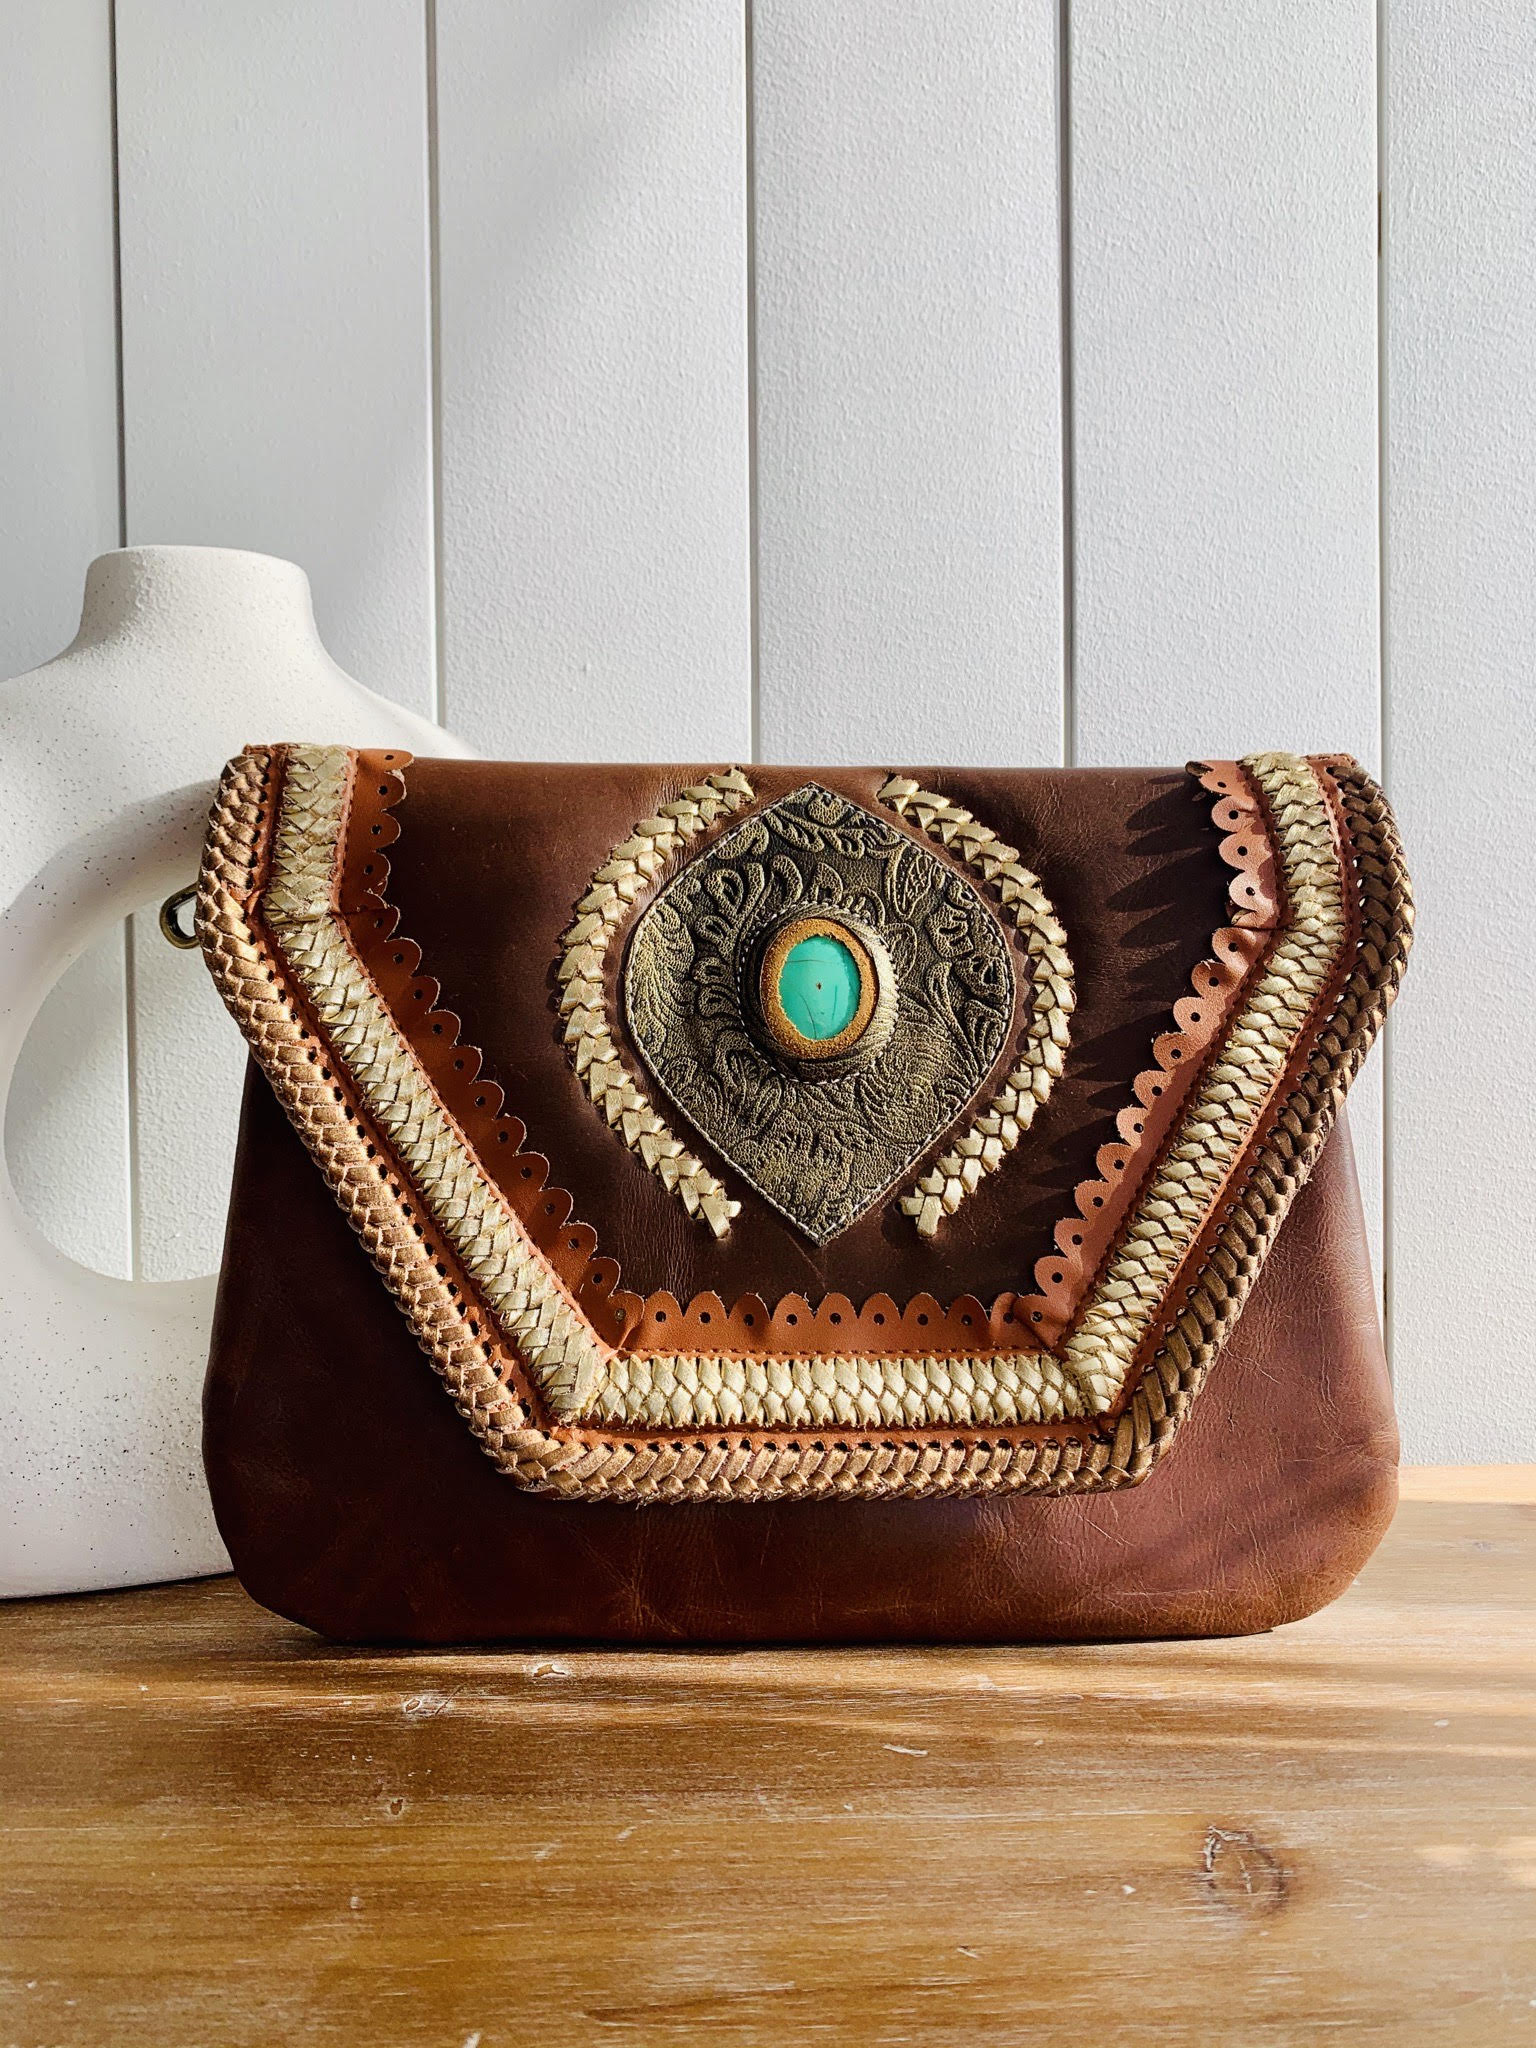 Pure Leather Boho Hand-Bag from Shantiniketan Kolkata, Hand-Carved and  Hand-Painted with Non-Toxic Vegetable Dyes | Exotic India Art